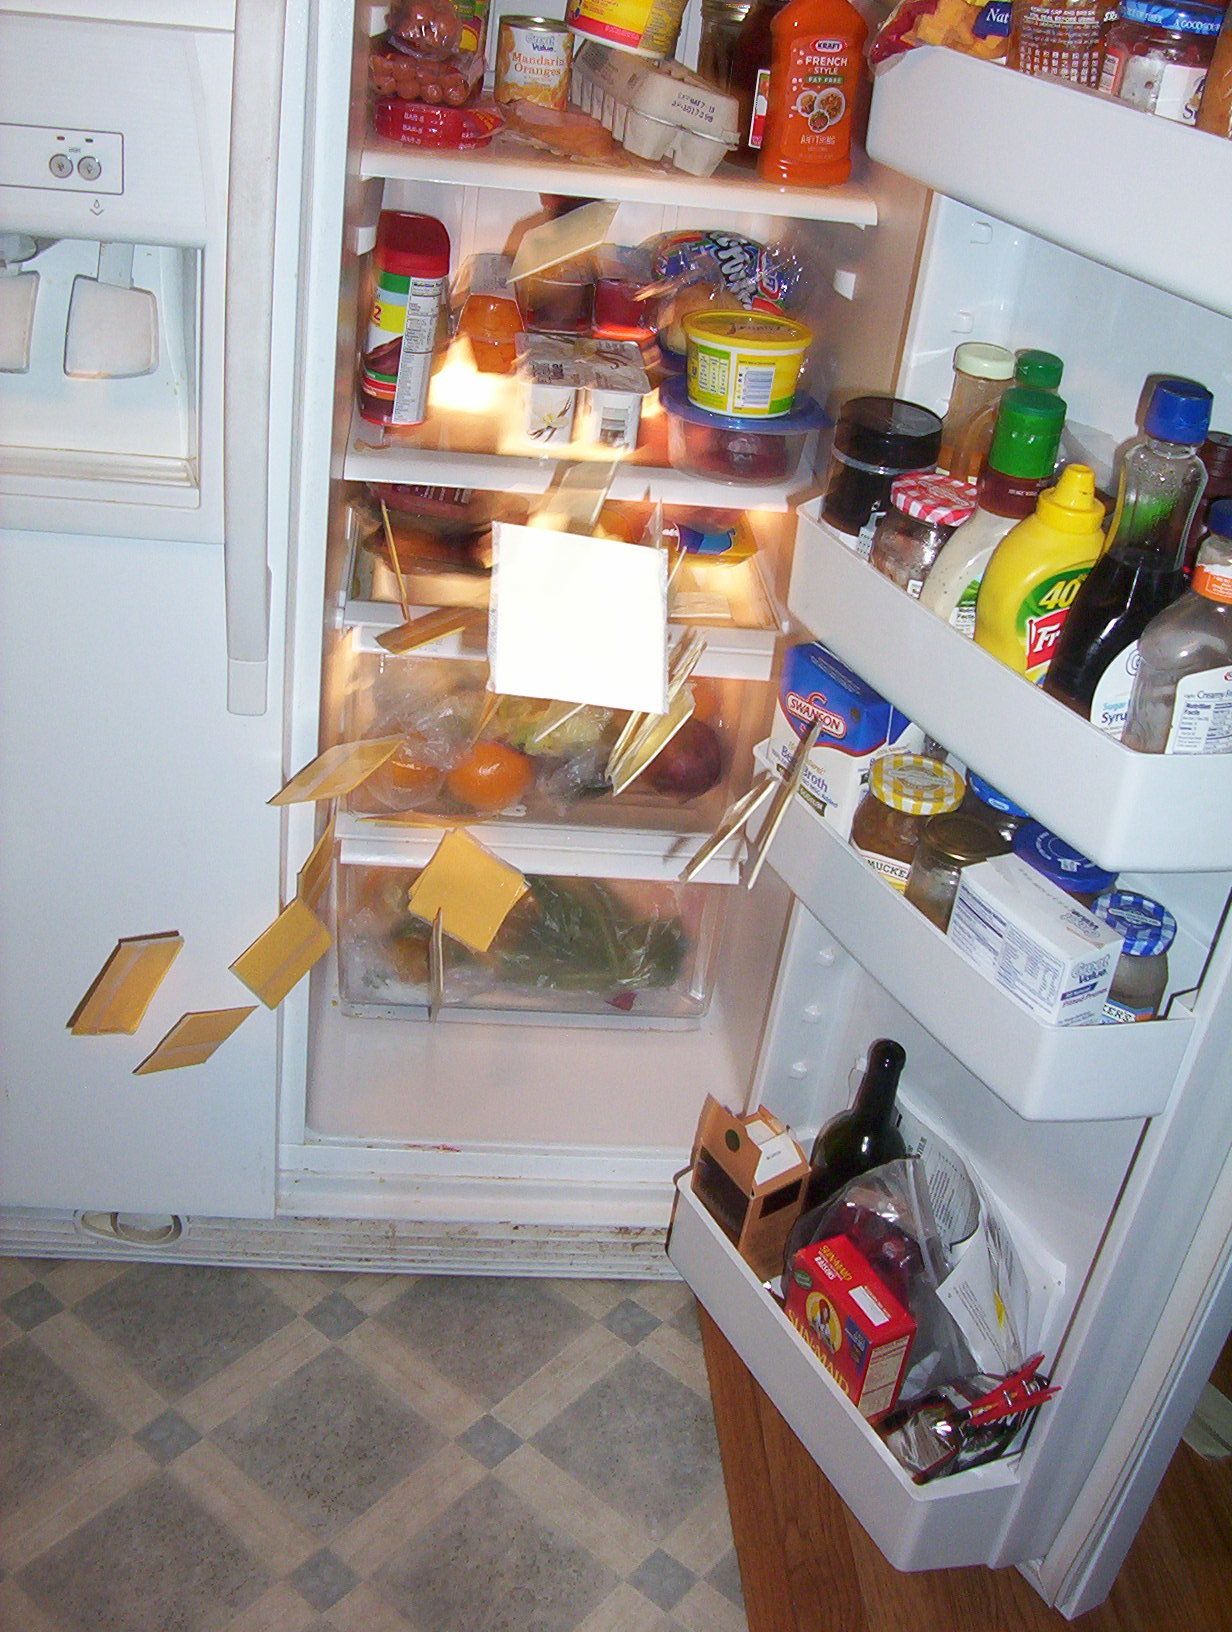 thepowergame-deactivated2015091: the cheese always falls off the top shelf if i open